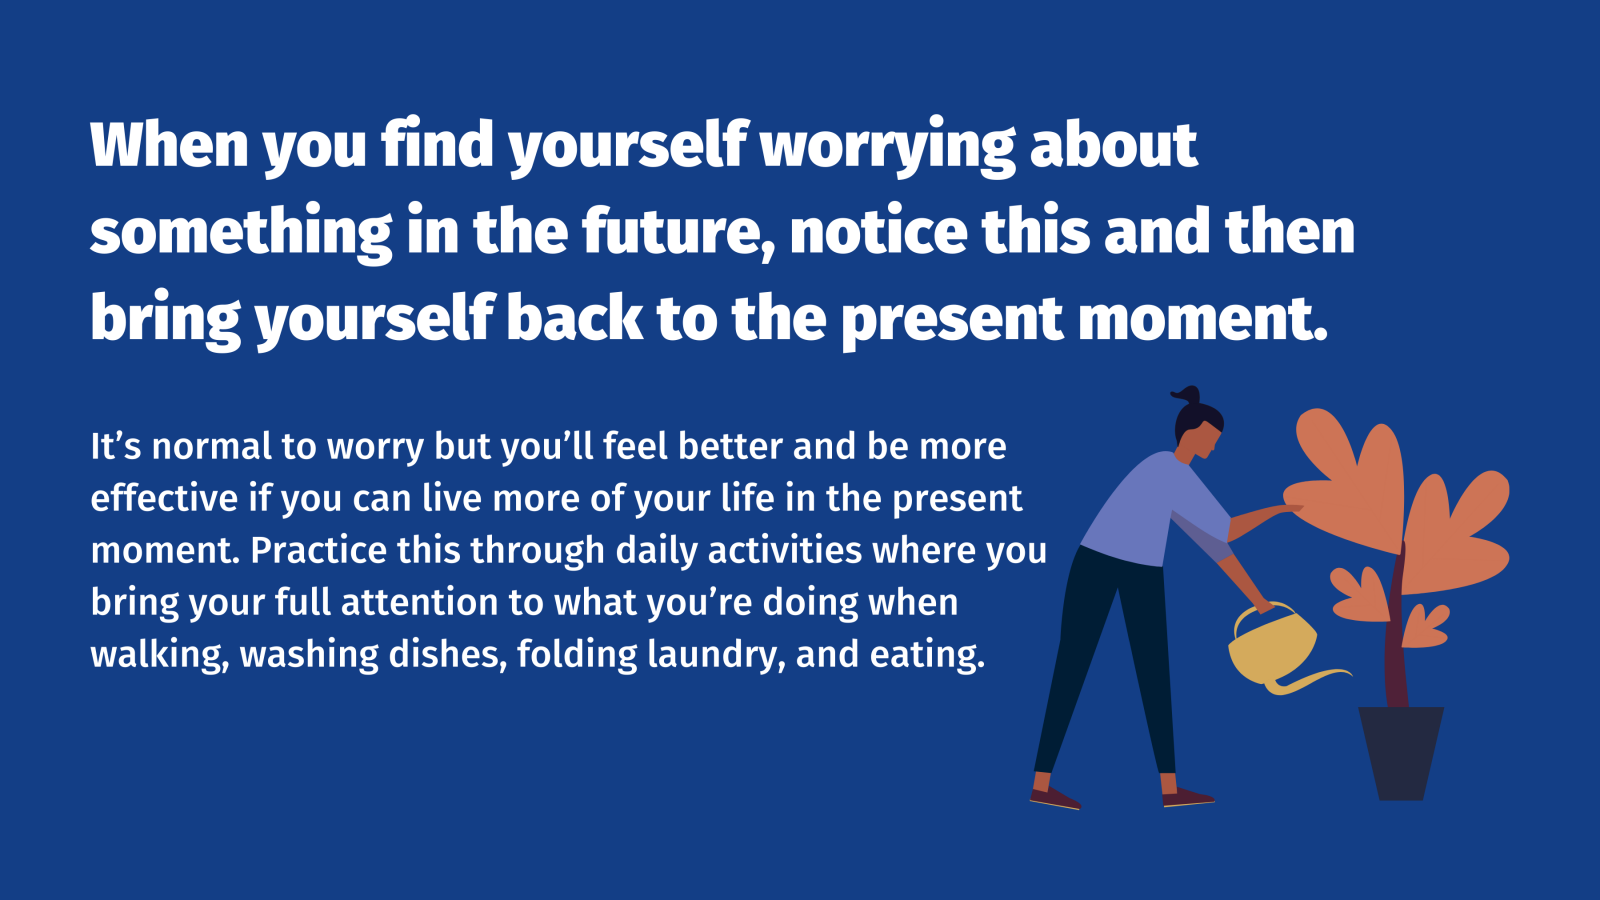 When worrying about the future, try to bring yourself back to the present moment poster